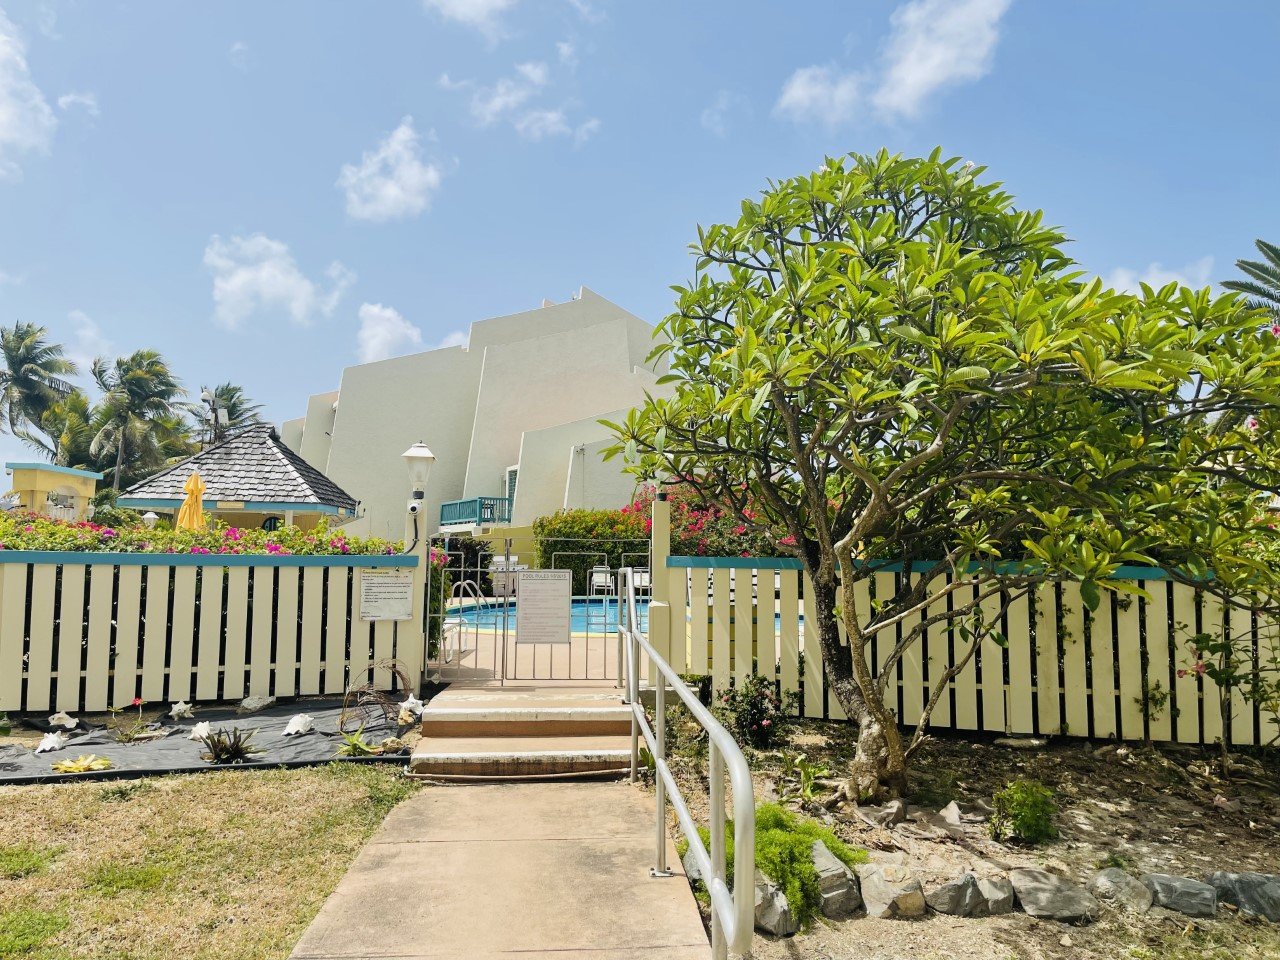 Entrance to the Pool of Colony Cove Condominiums!